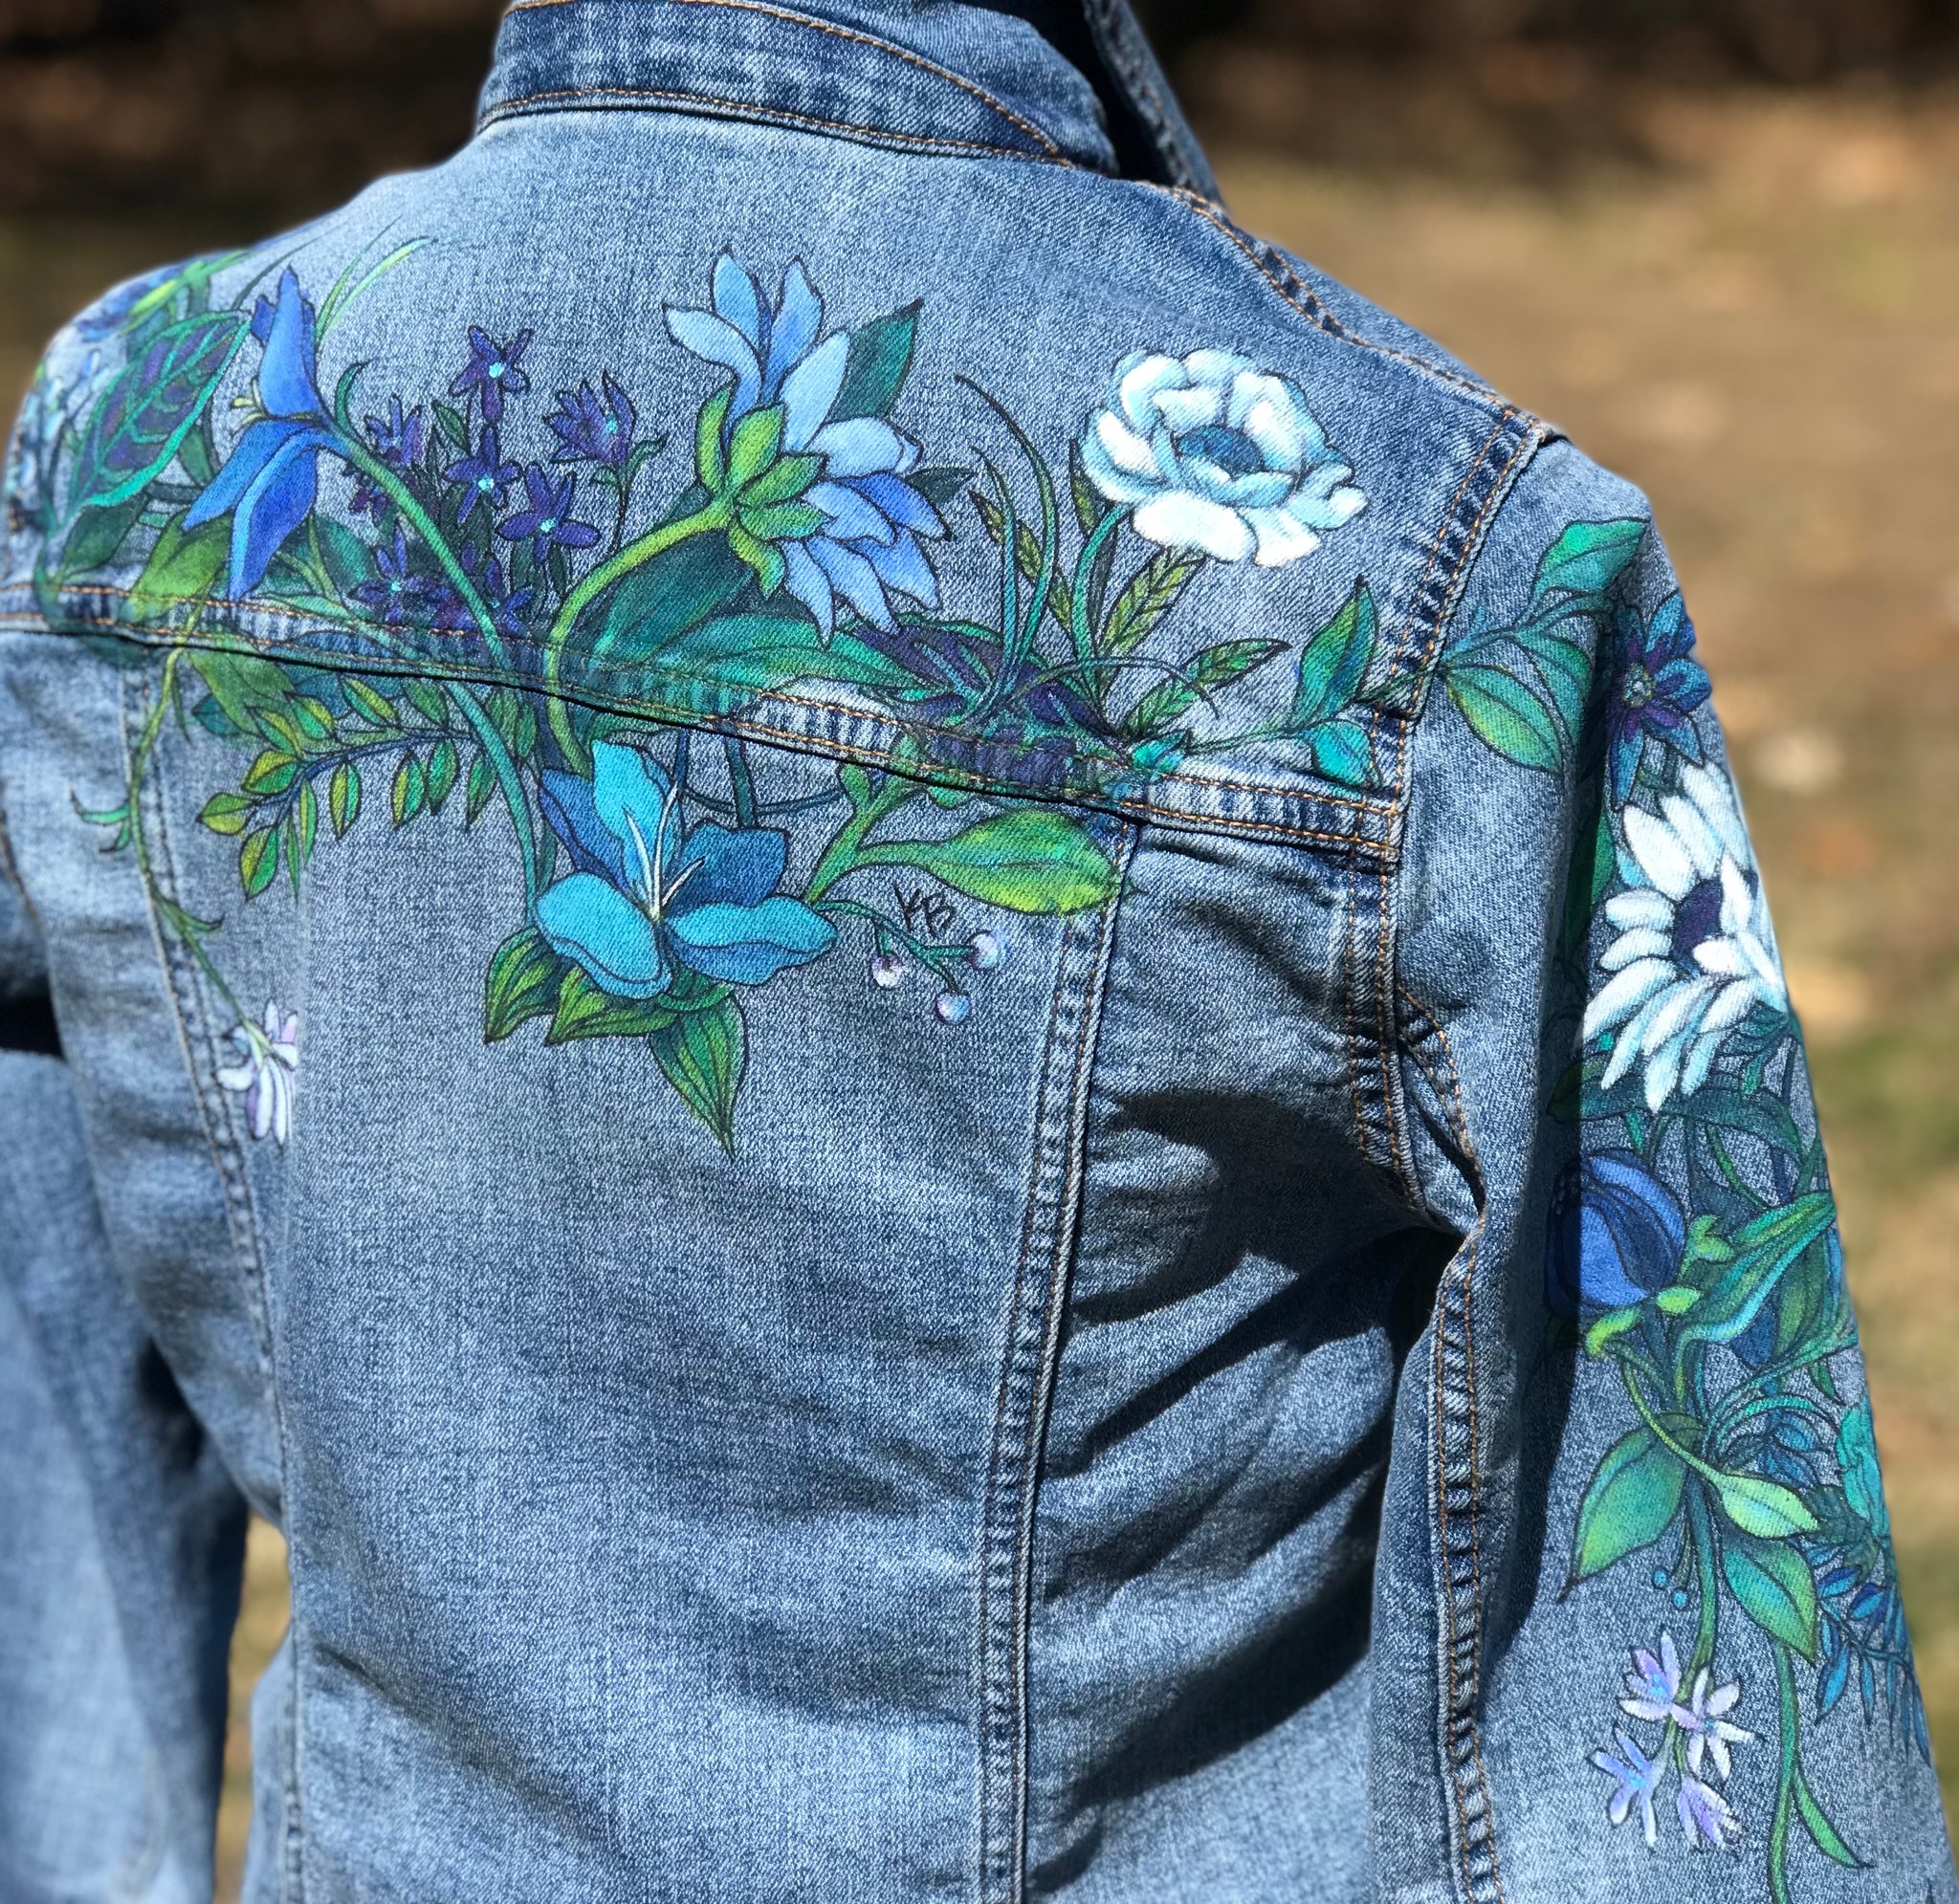 Presenting.. Hand-Painted Denim jackets, one of a kind.. for the very first  time!! FlaminArt x Silhouettes by Snea Crafted by an Artist... | Instagram